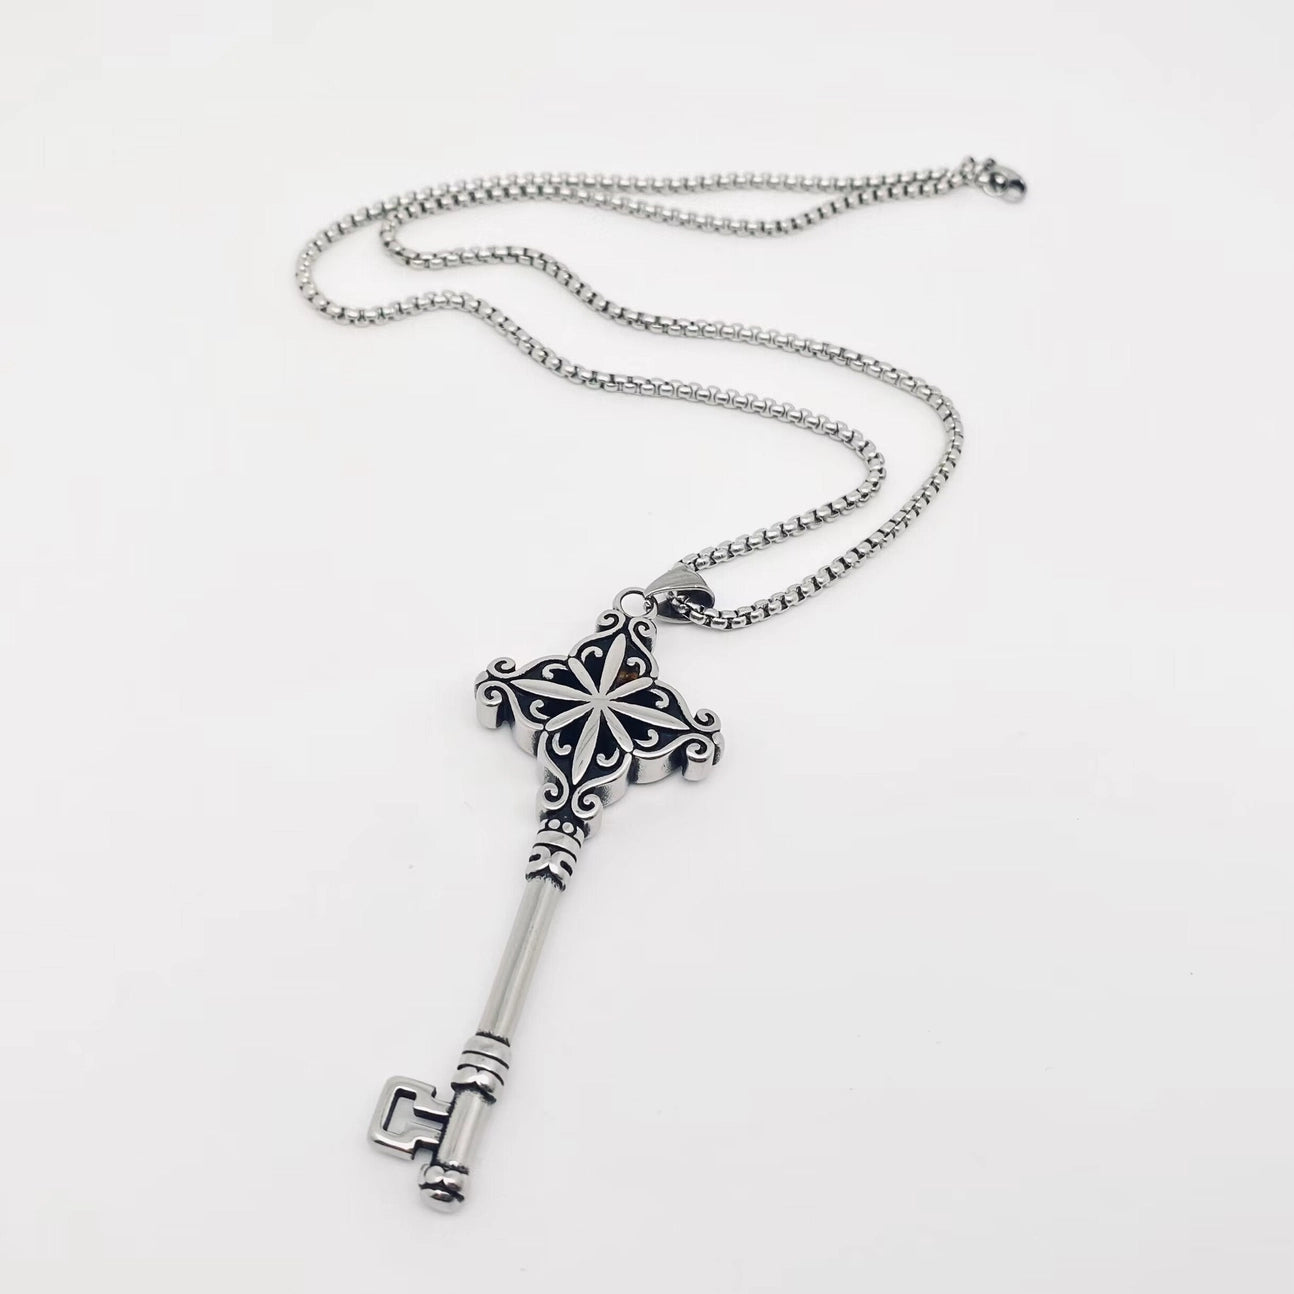 Ornate stainless steel antique style key pendant on 23” stainless steel box chain